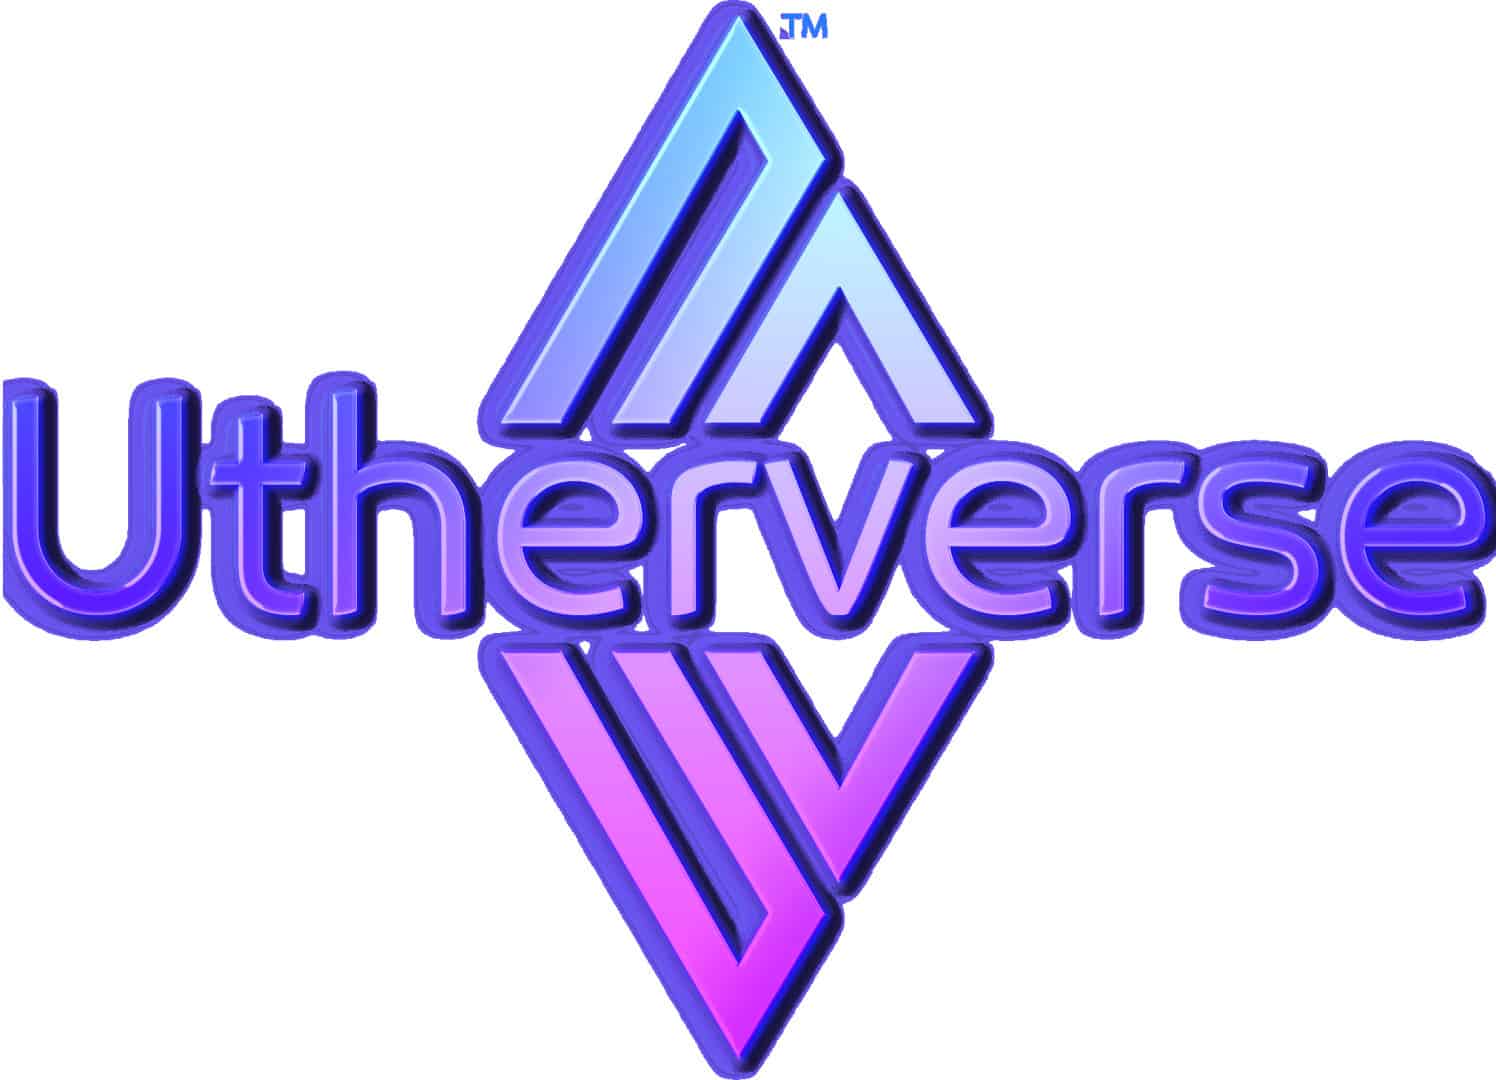 Utherverse-partners-with-tokensoft-to-launch-ido-for-native-metaverse-token